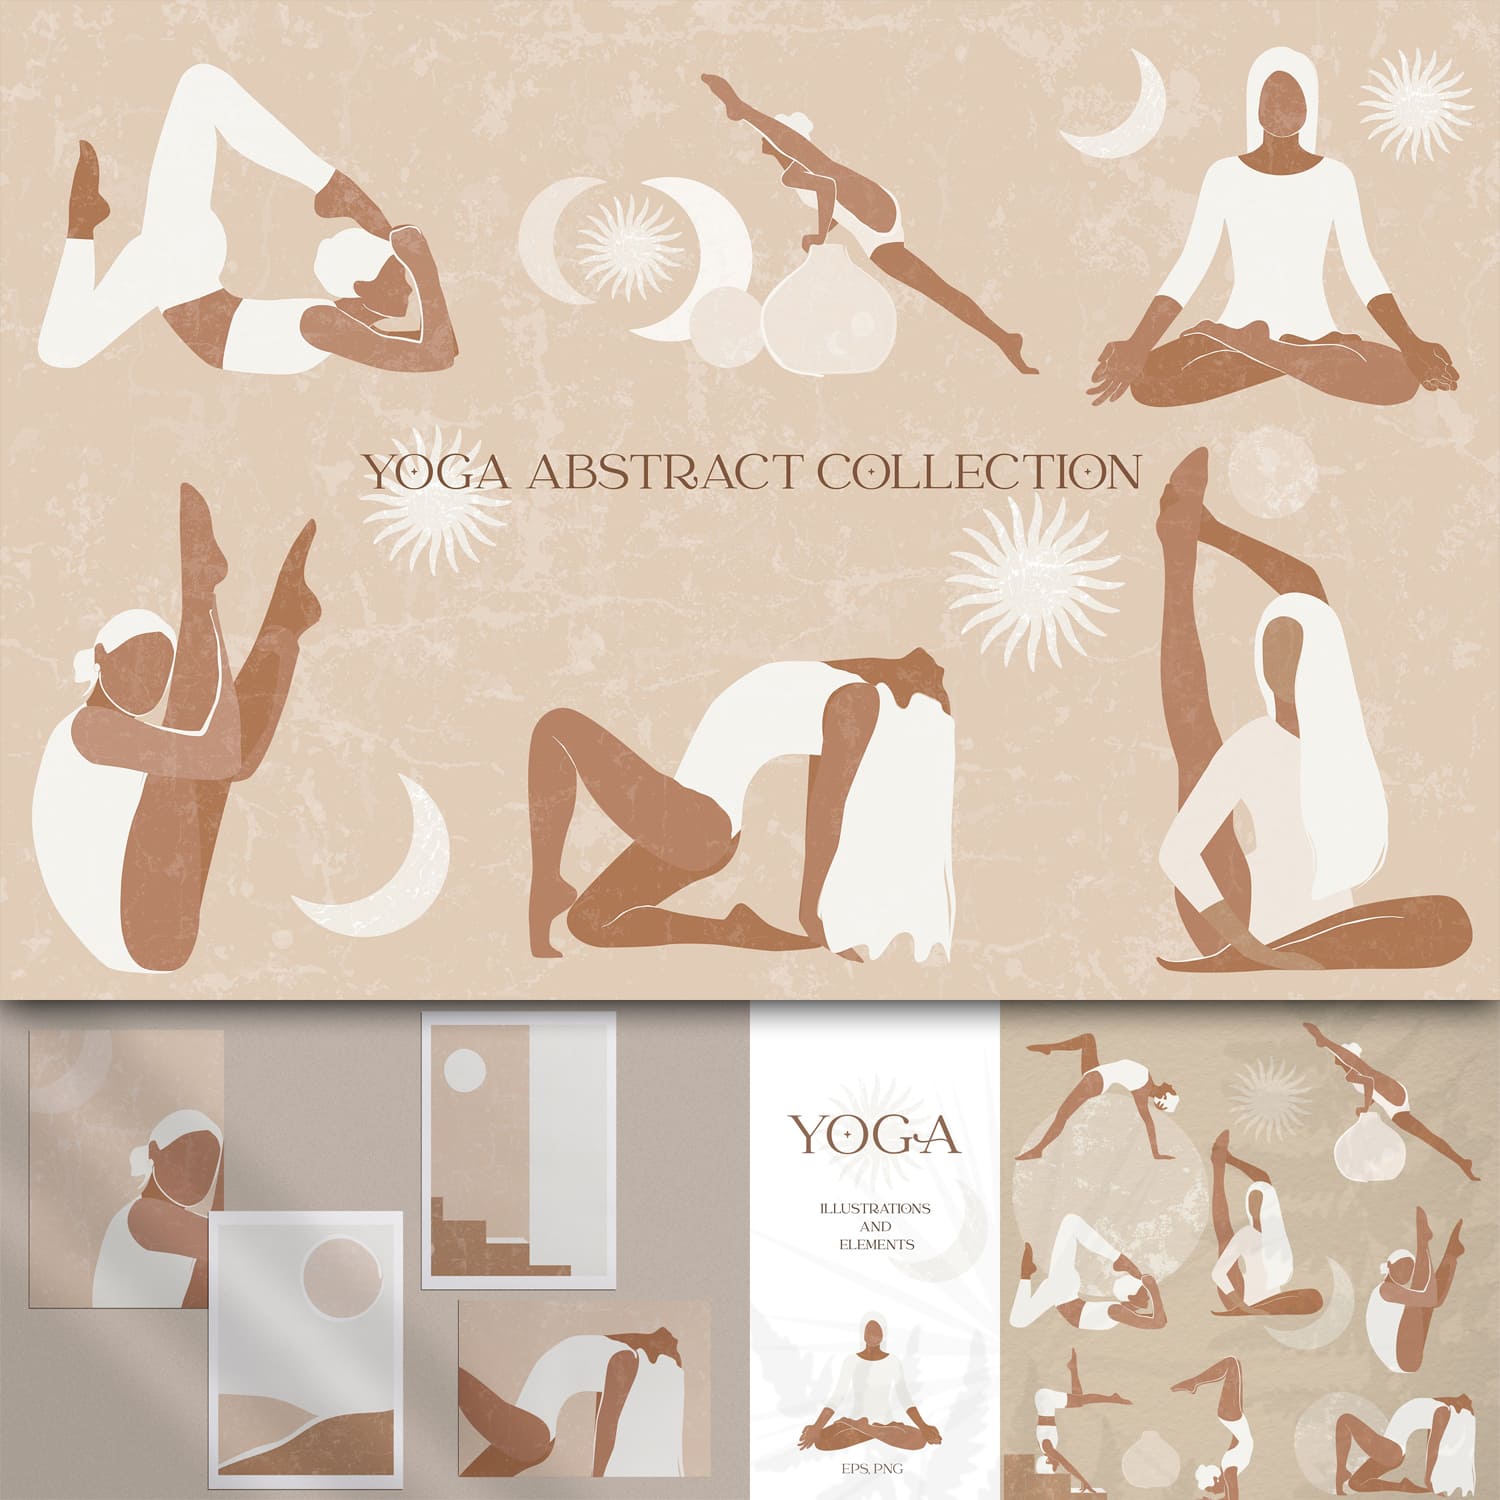 Yoga abstract graphic collection - main image preview.